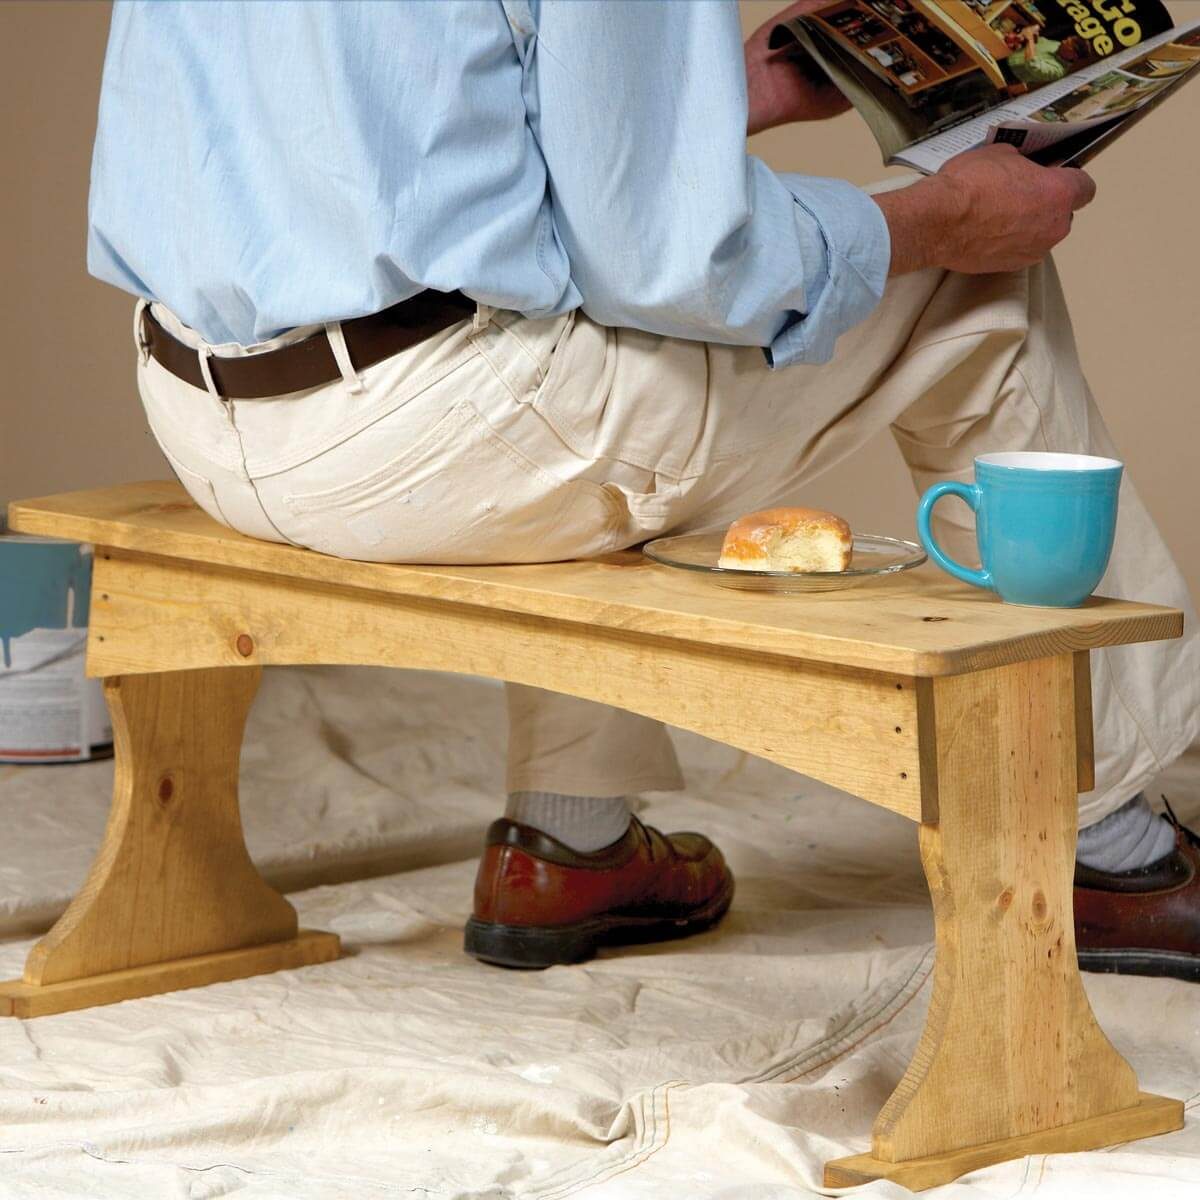 15 Awesome Woodworking Projects to Try — The Family Handyman